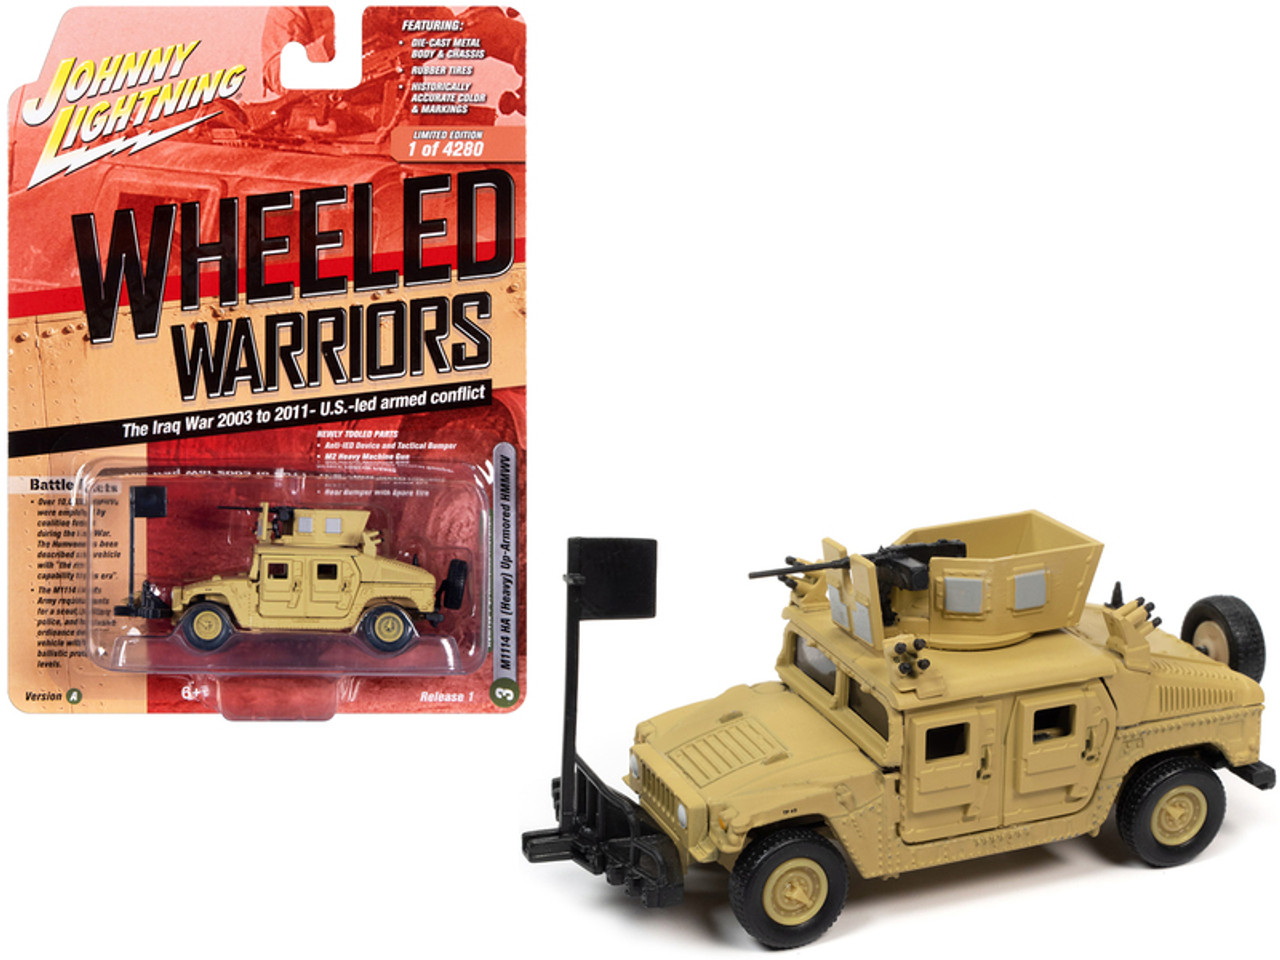 Humvee 4-CT Armored Fastback M1114 HA (Heavy) Up-Armored HMMWV Tan "The Iraq War 2003 to 2011 - U.S. - Led Armed Conflict" "Wheeled Warriors" Series Limited Edition to 4280 pieces Worldwide 1/64 Diecast Model Car by Johnny Lightning